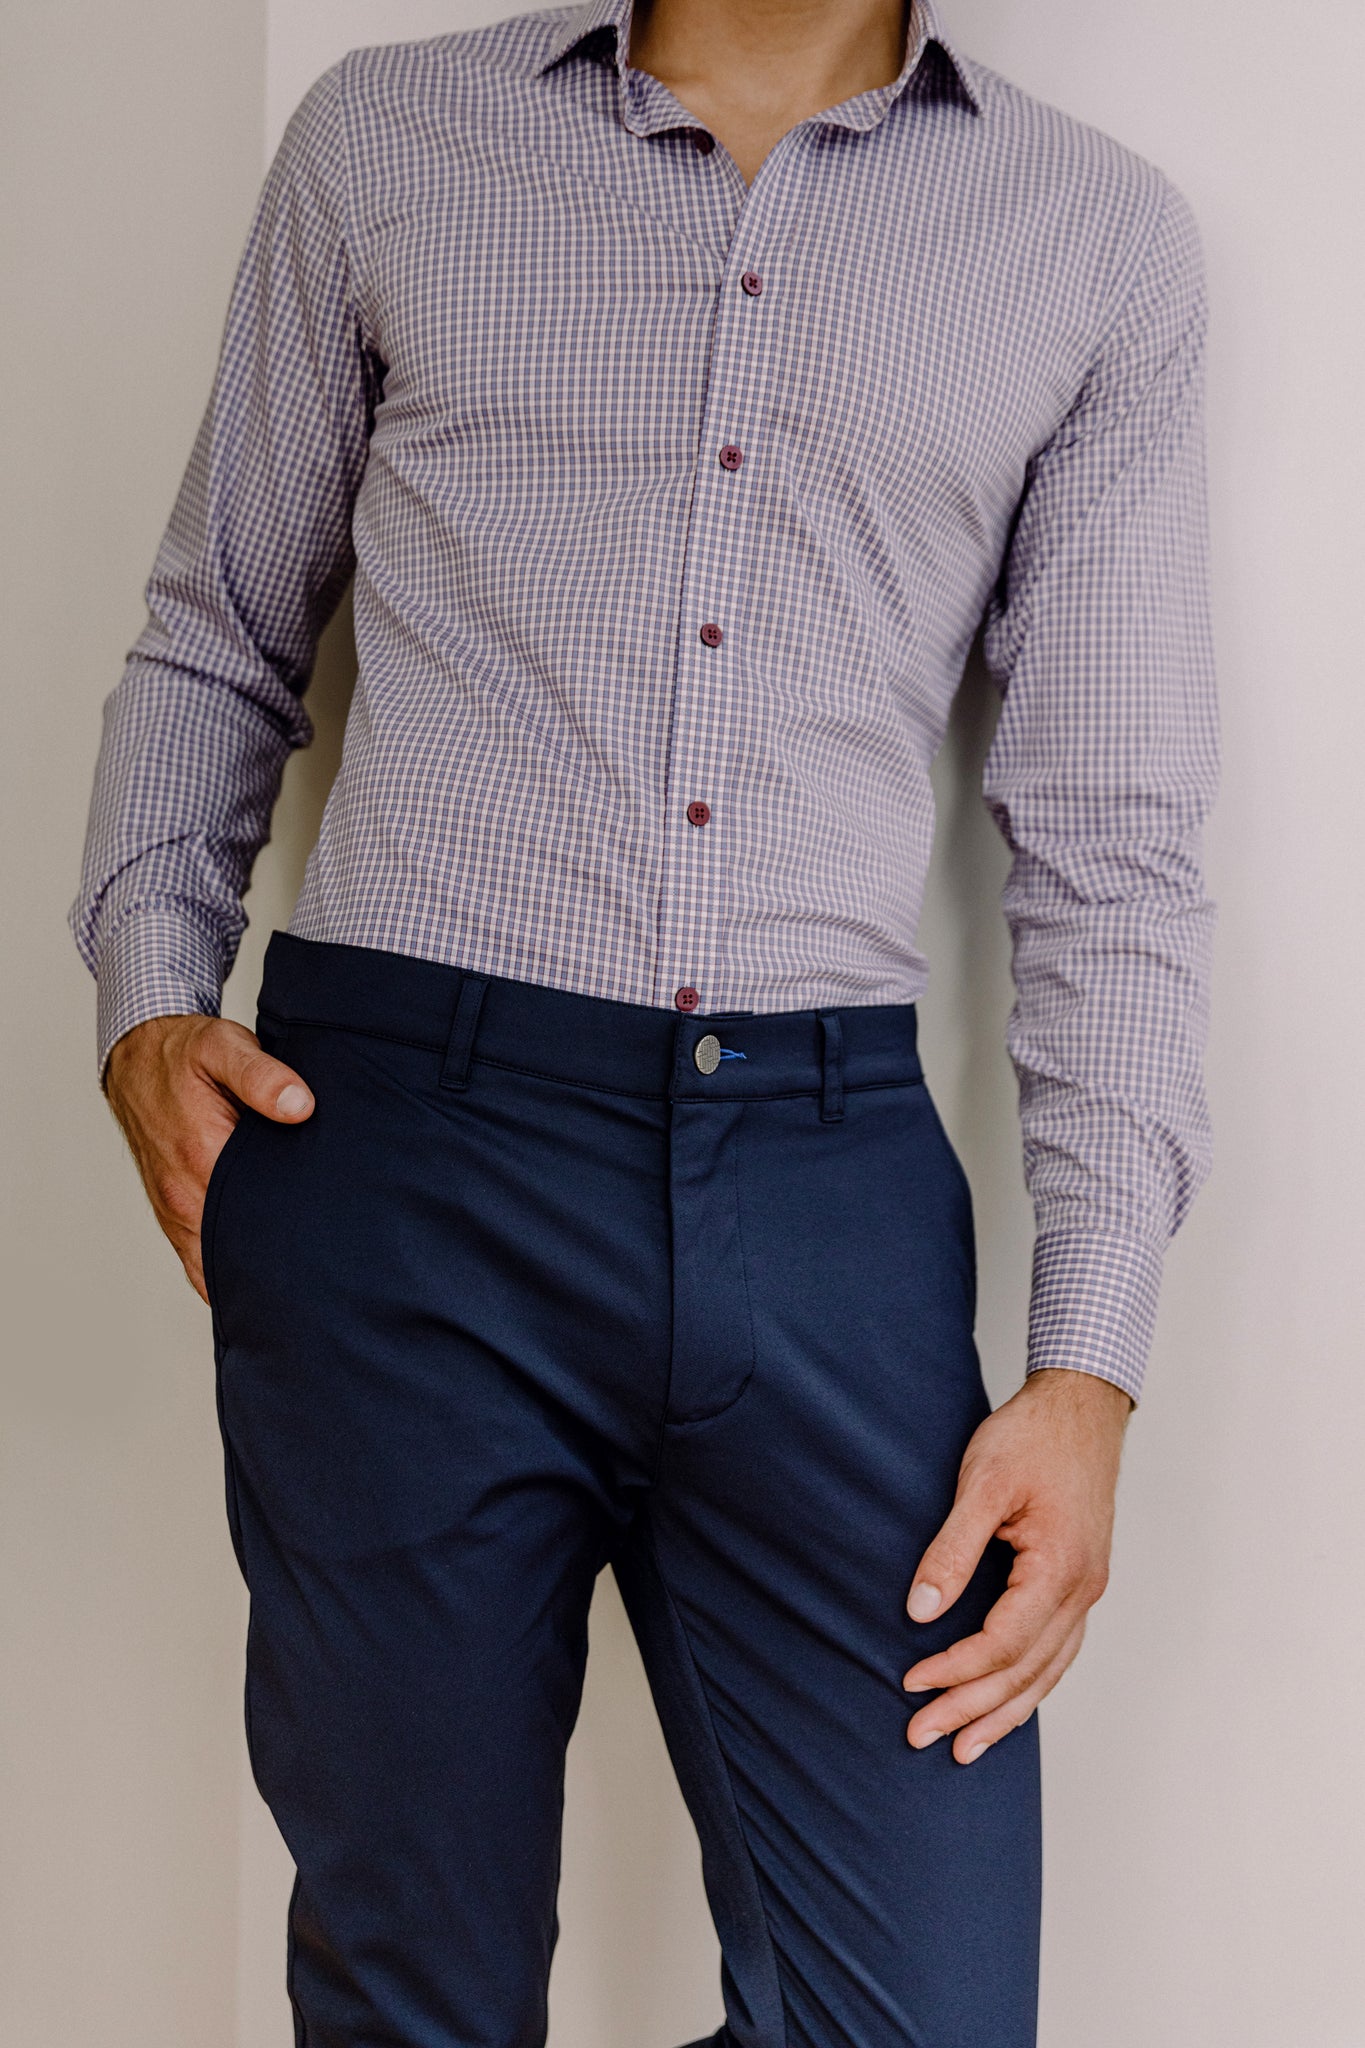 How to Tuck in a Dress Shirt: 5 Pro Tips